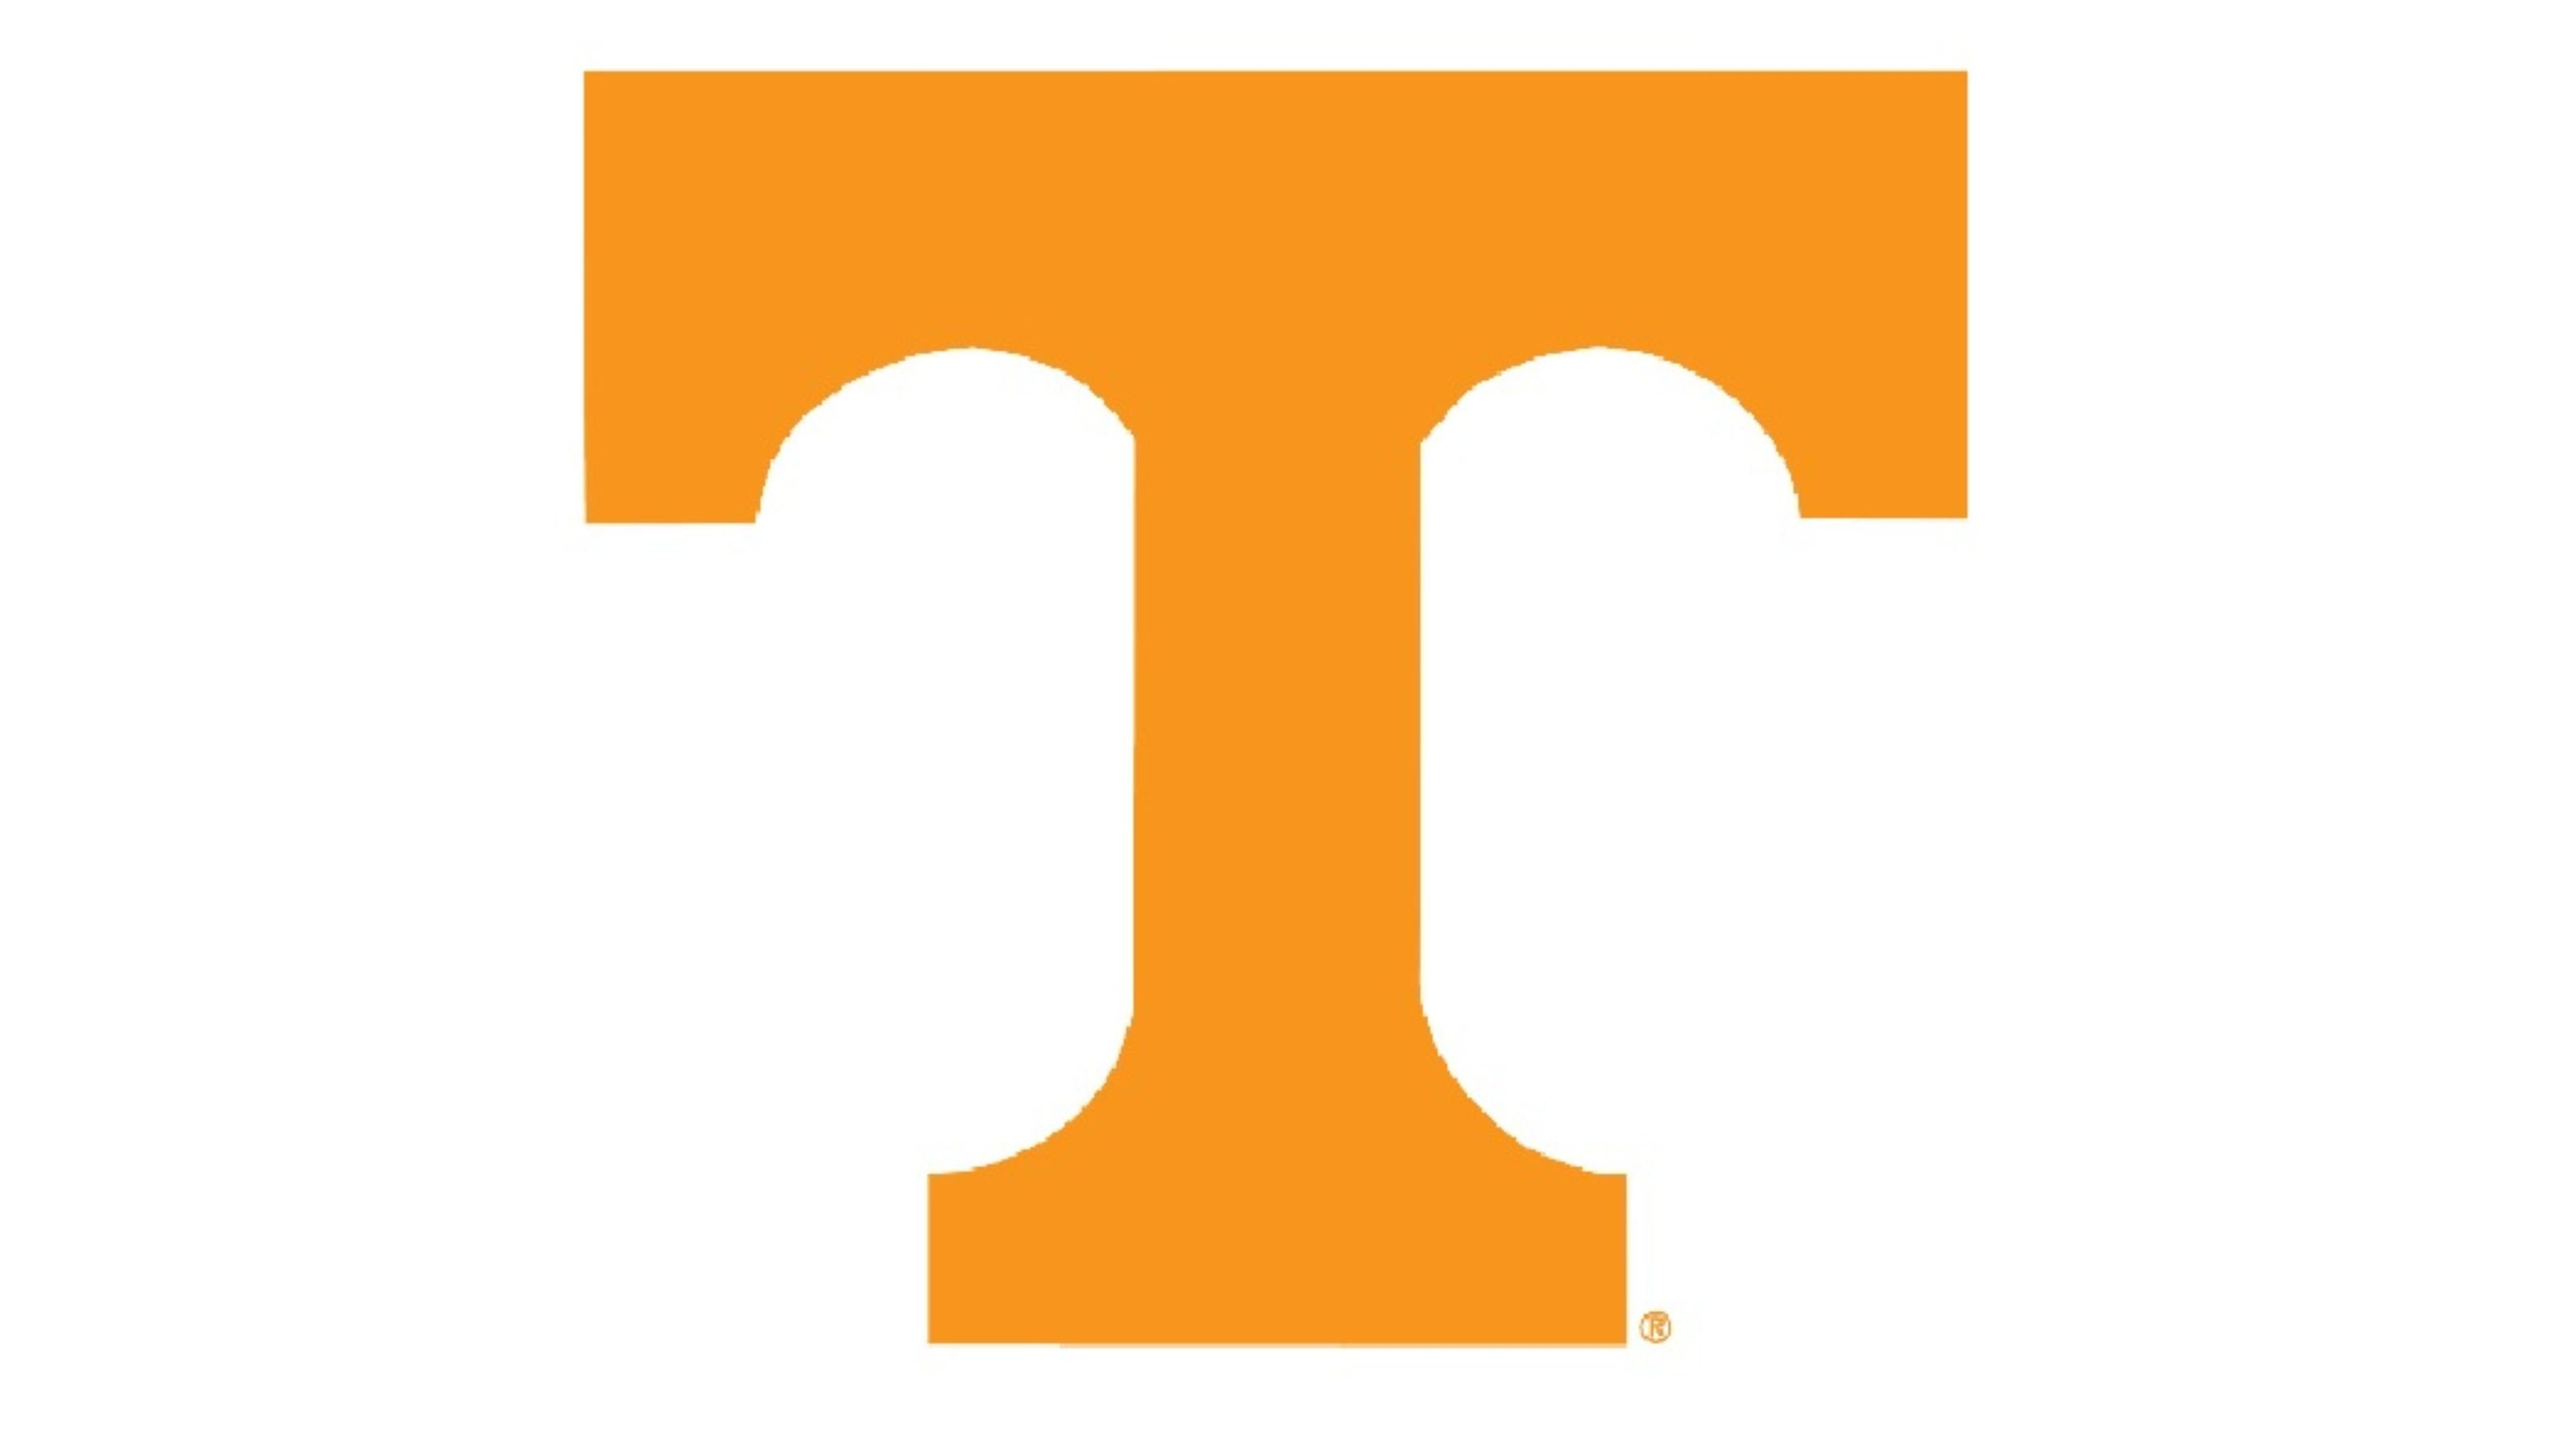 3200x1800 Free download TENNESSEE VOLUNTEERS football college wallpaper background [] for your Desktop, Mobile \u0026 Tablet | Explore 47+ Tennessee Volunteers Wallpaper Desktop | Tennessee Vols Wallpaper or Screensavers, Tennessee Vols Wallpaper Desktop